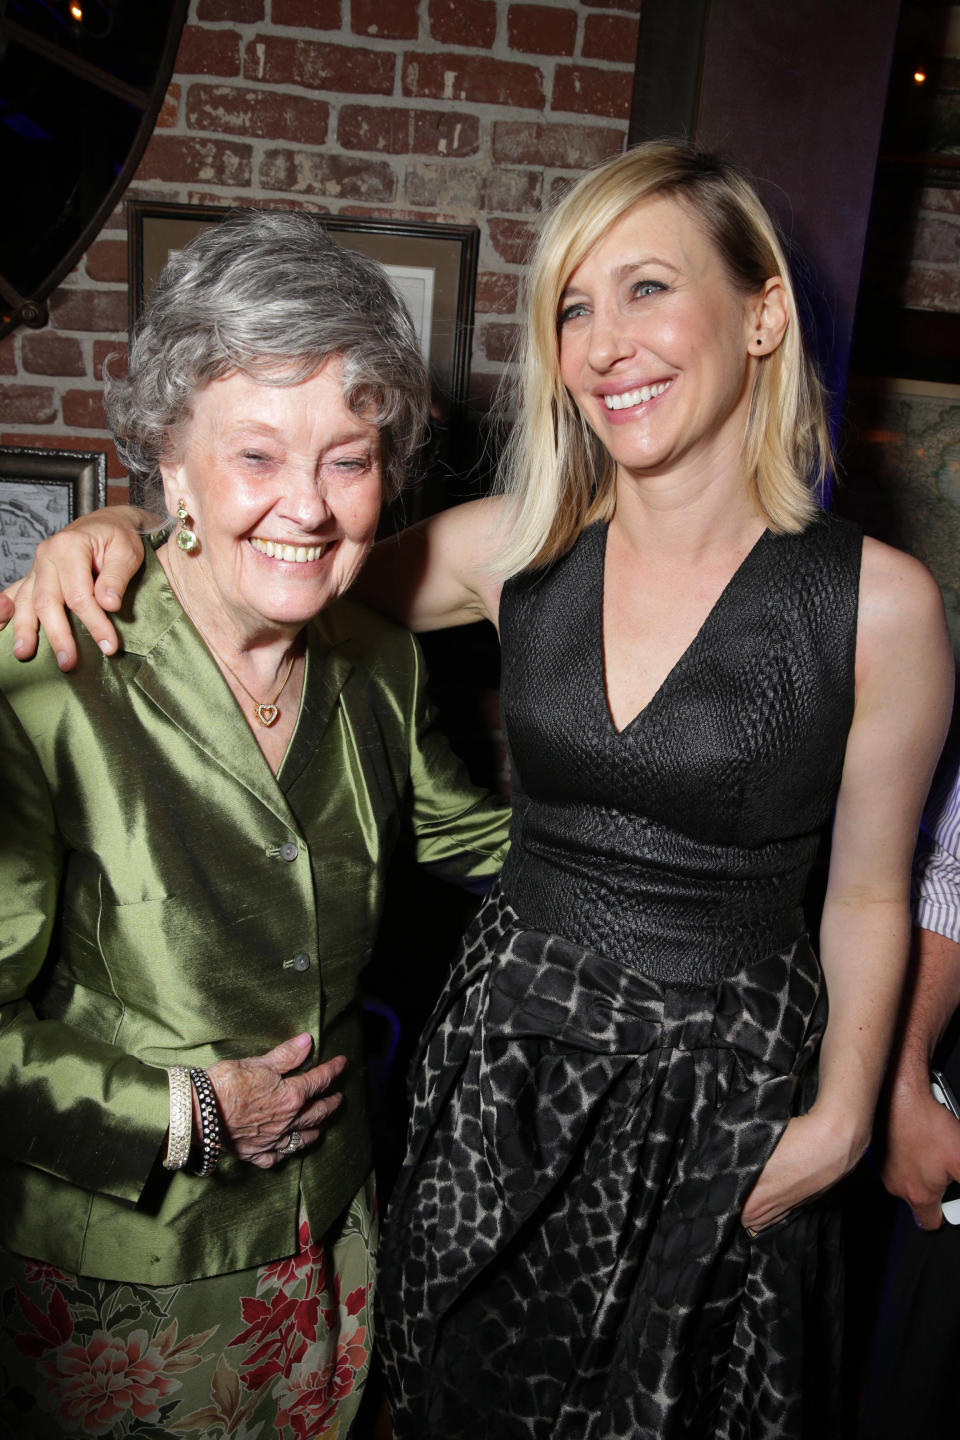 Lorraine Warren and Vera Farmiga seen at New Line Cinema's 'The Conjuring' Premiere, on Monday, July, 15, 2013 in Los Angeles. (Photo by Eric Charbonneau/Invision for New Line Cinema/AP Images)